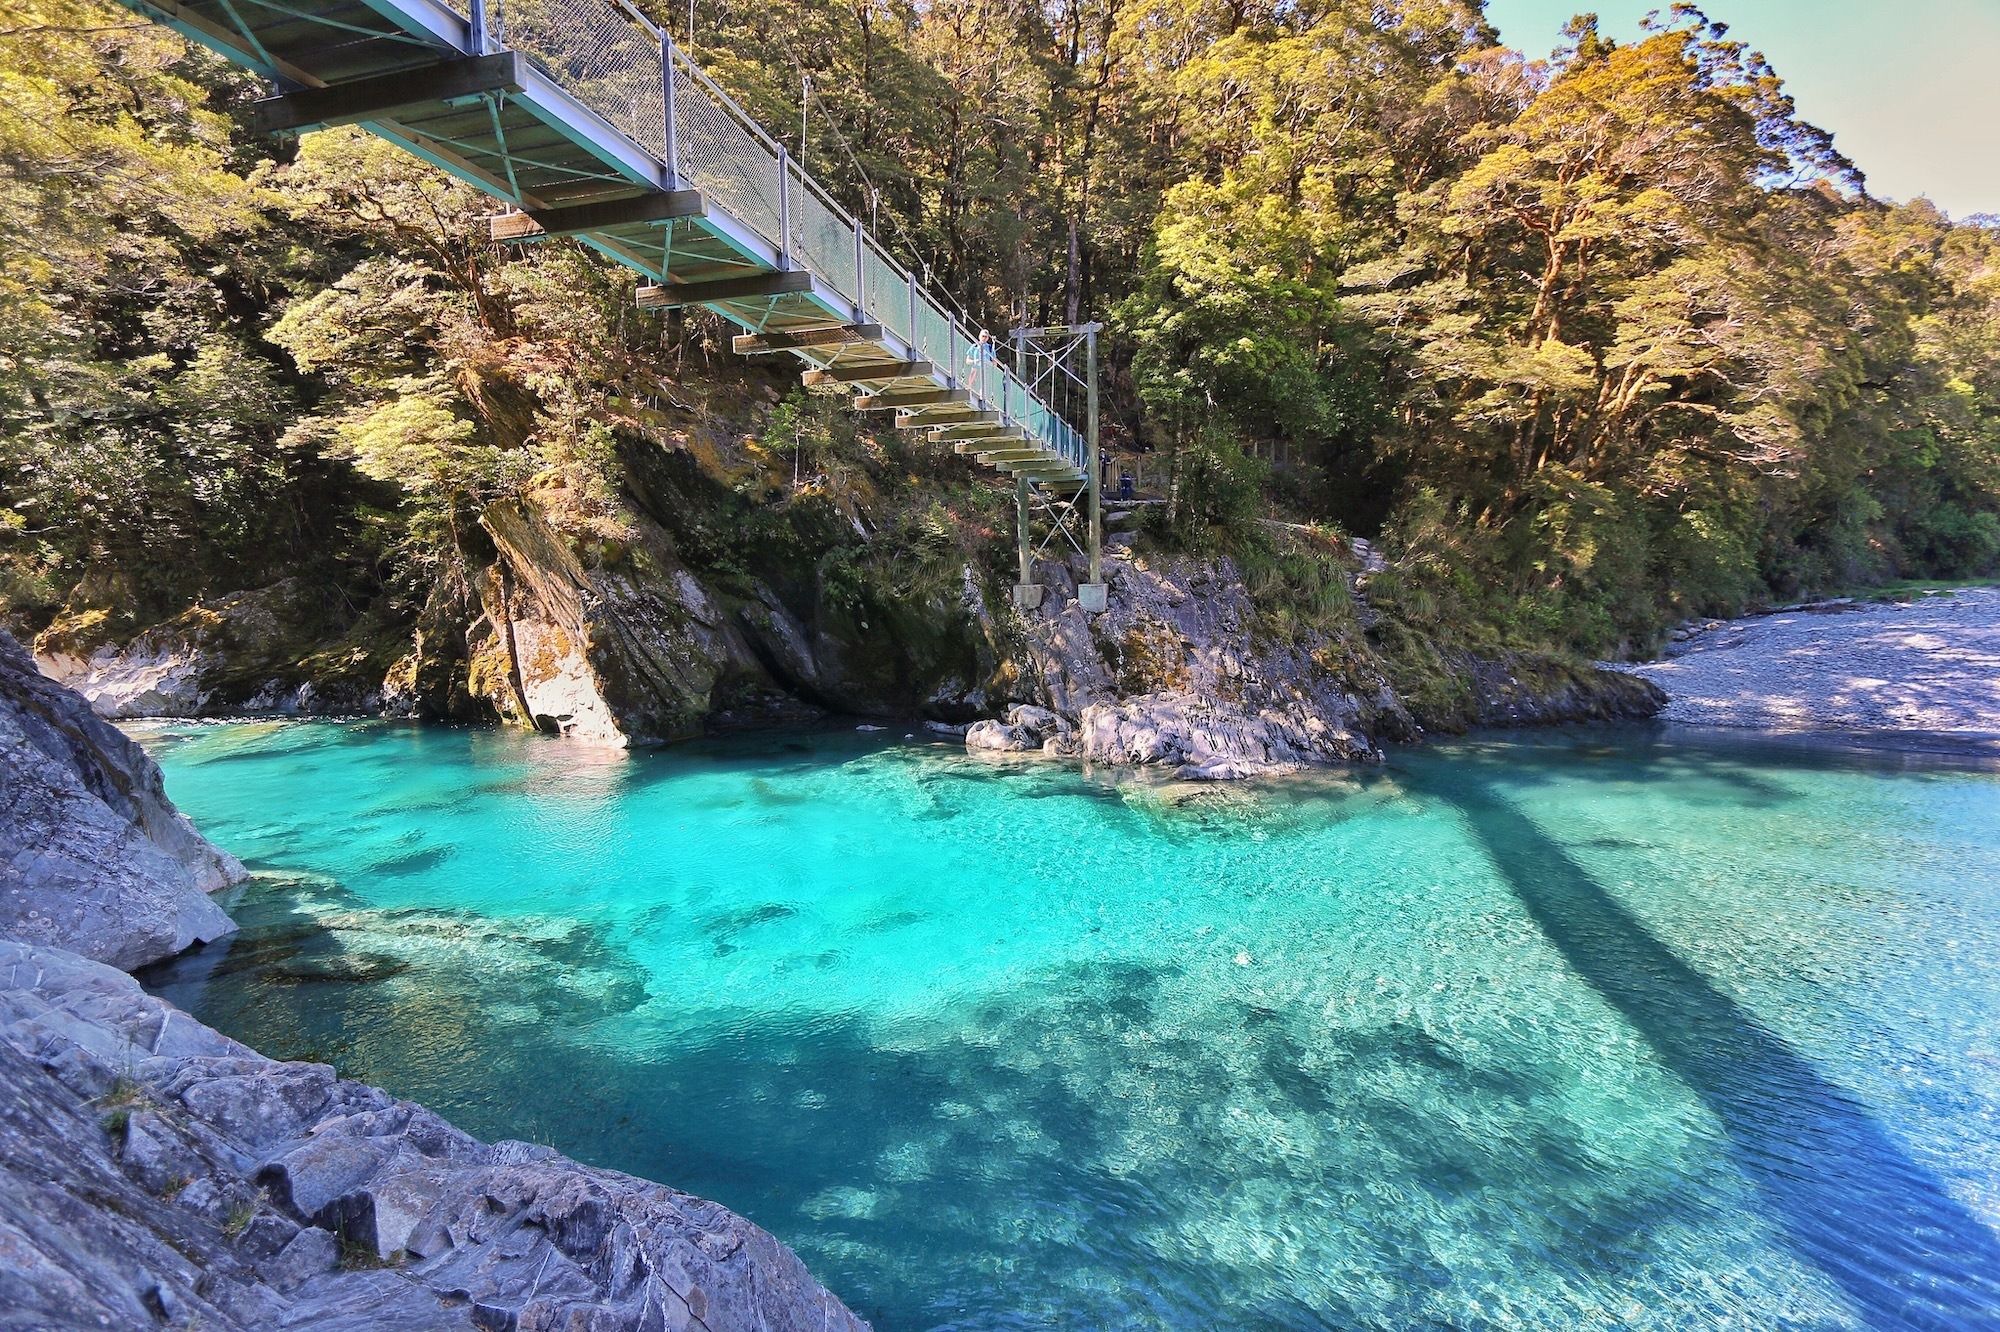 Traverc Blue-Pools The 10 most Instagrammable spots in Wānaka  